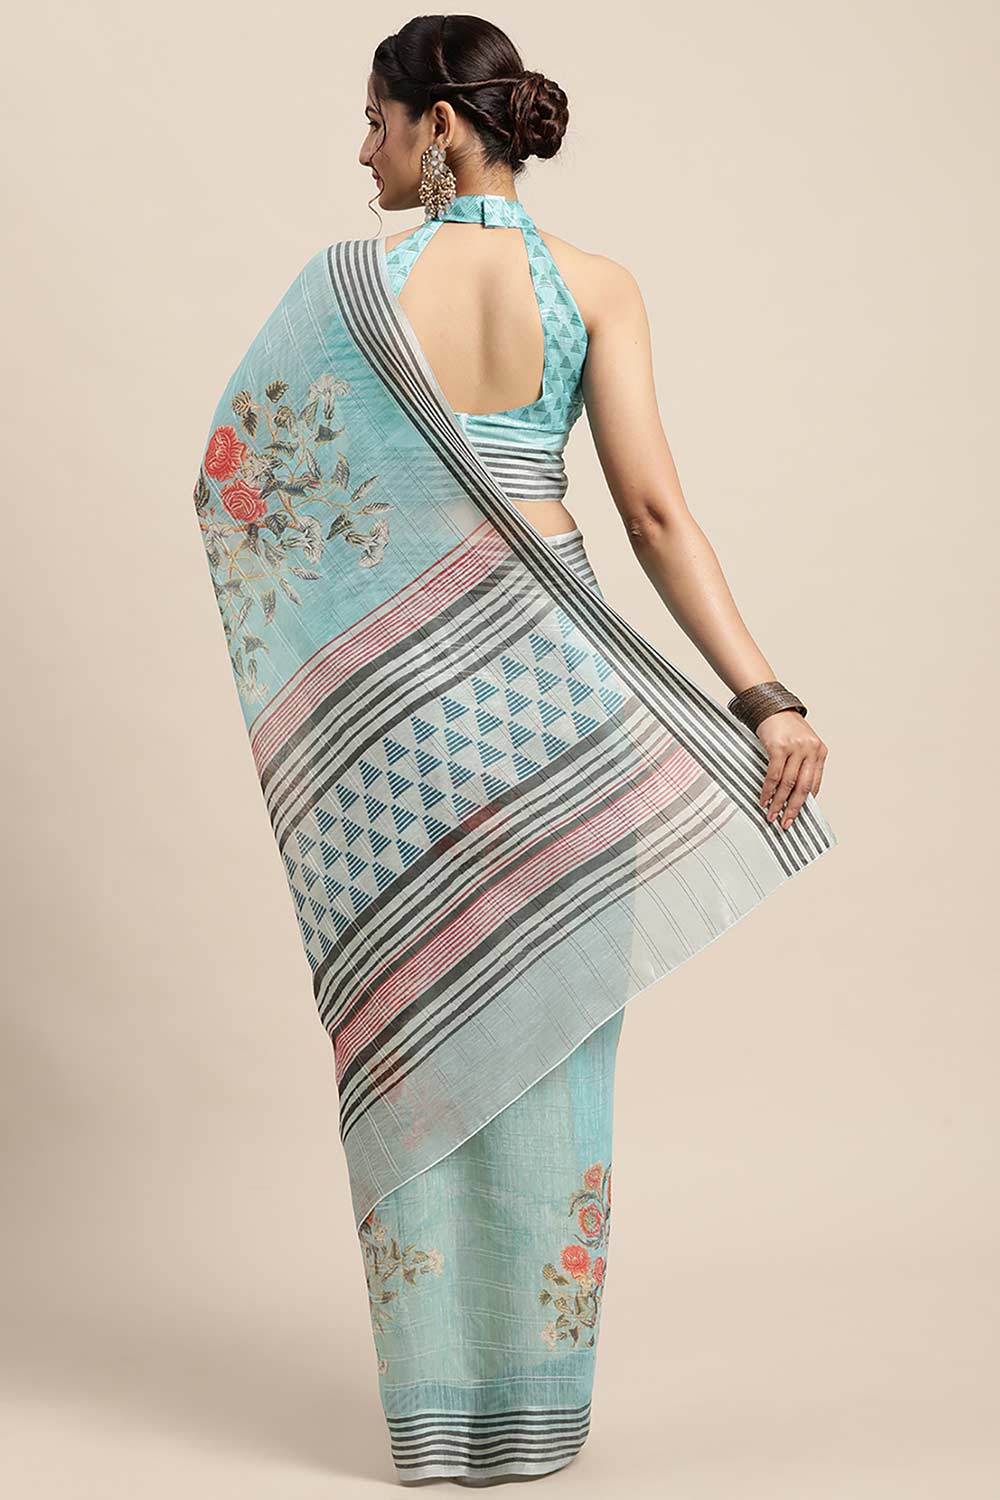 Shop Bimala Blue Soft Silk Floral Printed Banarasi One Minute Saree at best offer at our  Store - One Minute Saree